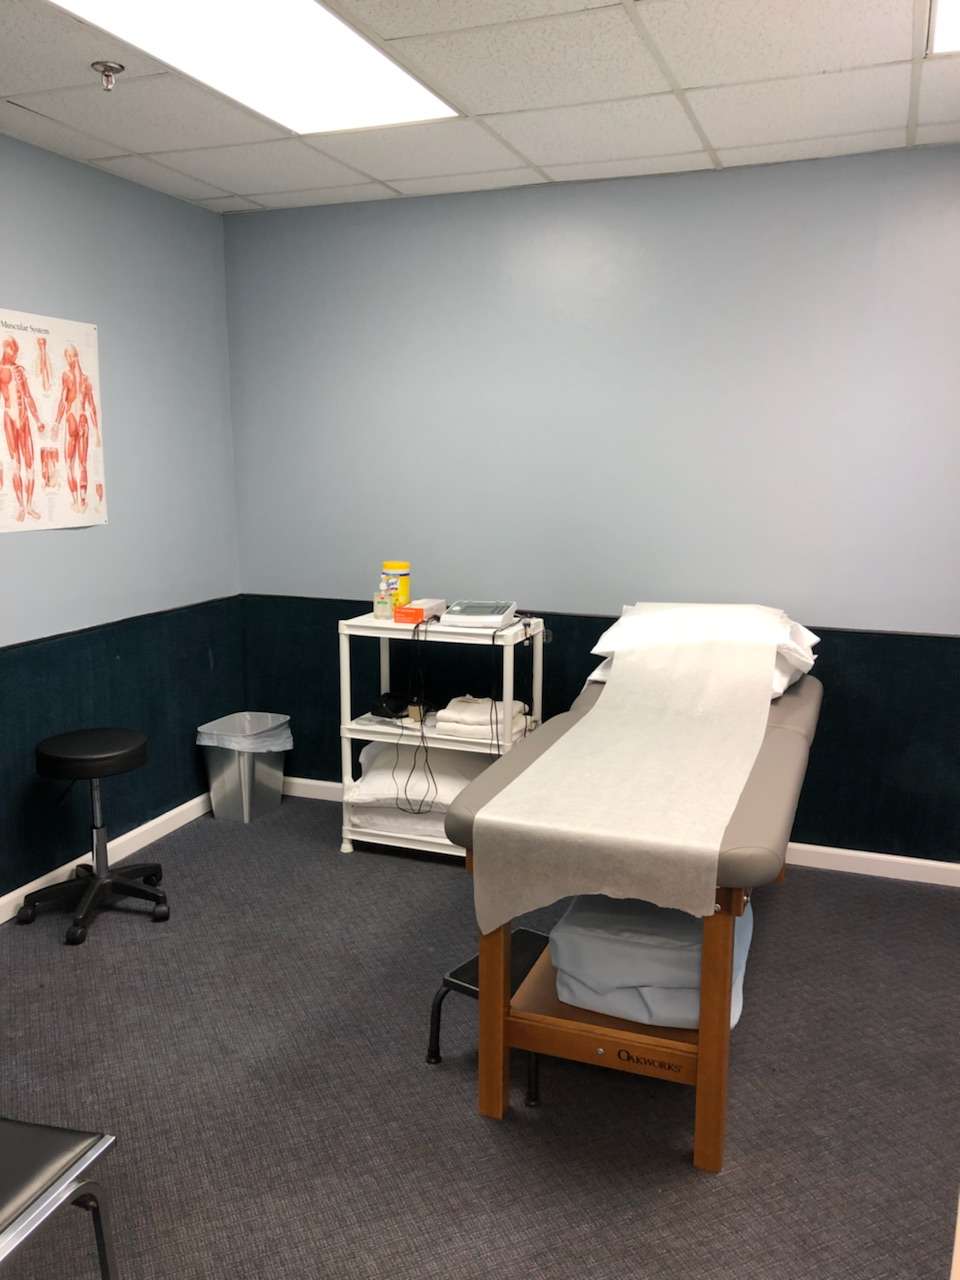 Mancini Physical Therapy | 375 Commack Rd, Deer Park, NY 11729 | Phone: (631) 522-1955